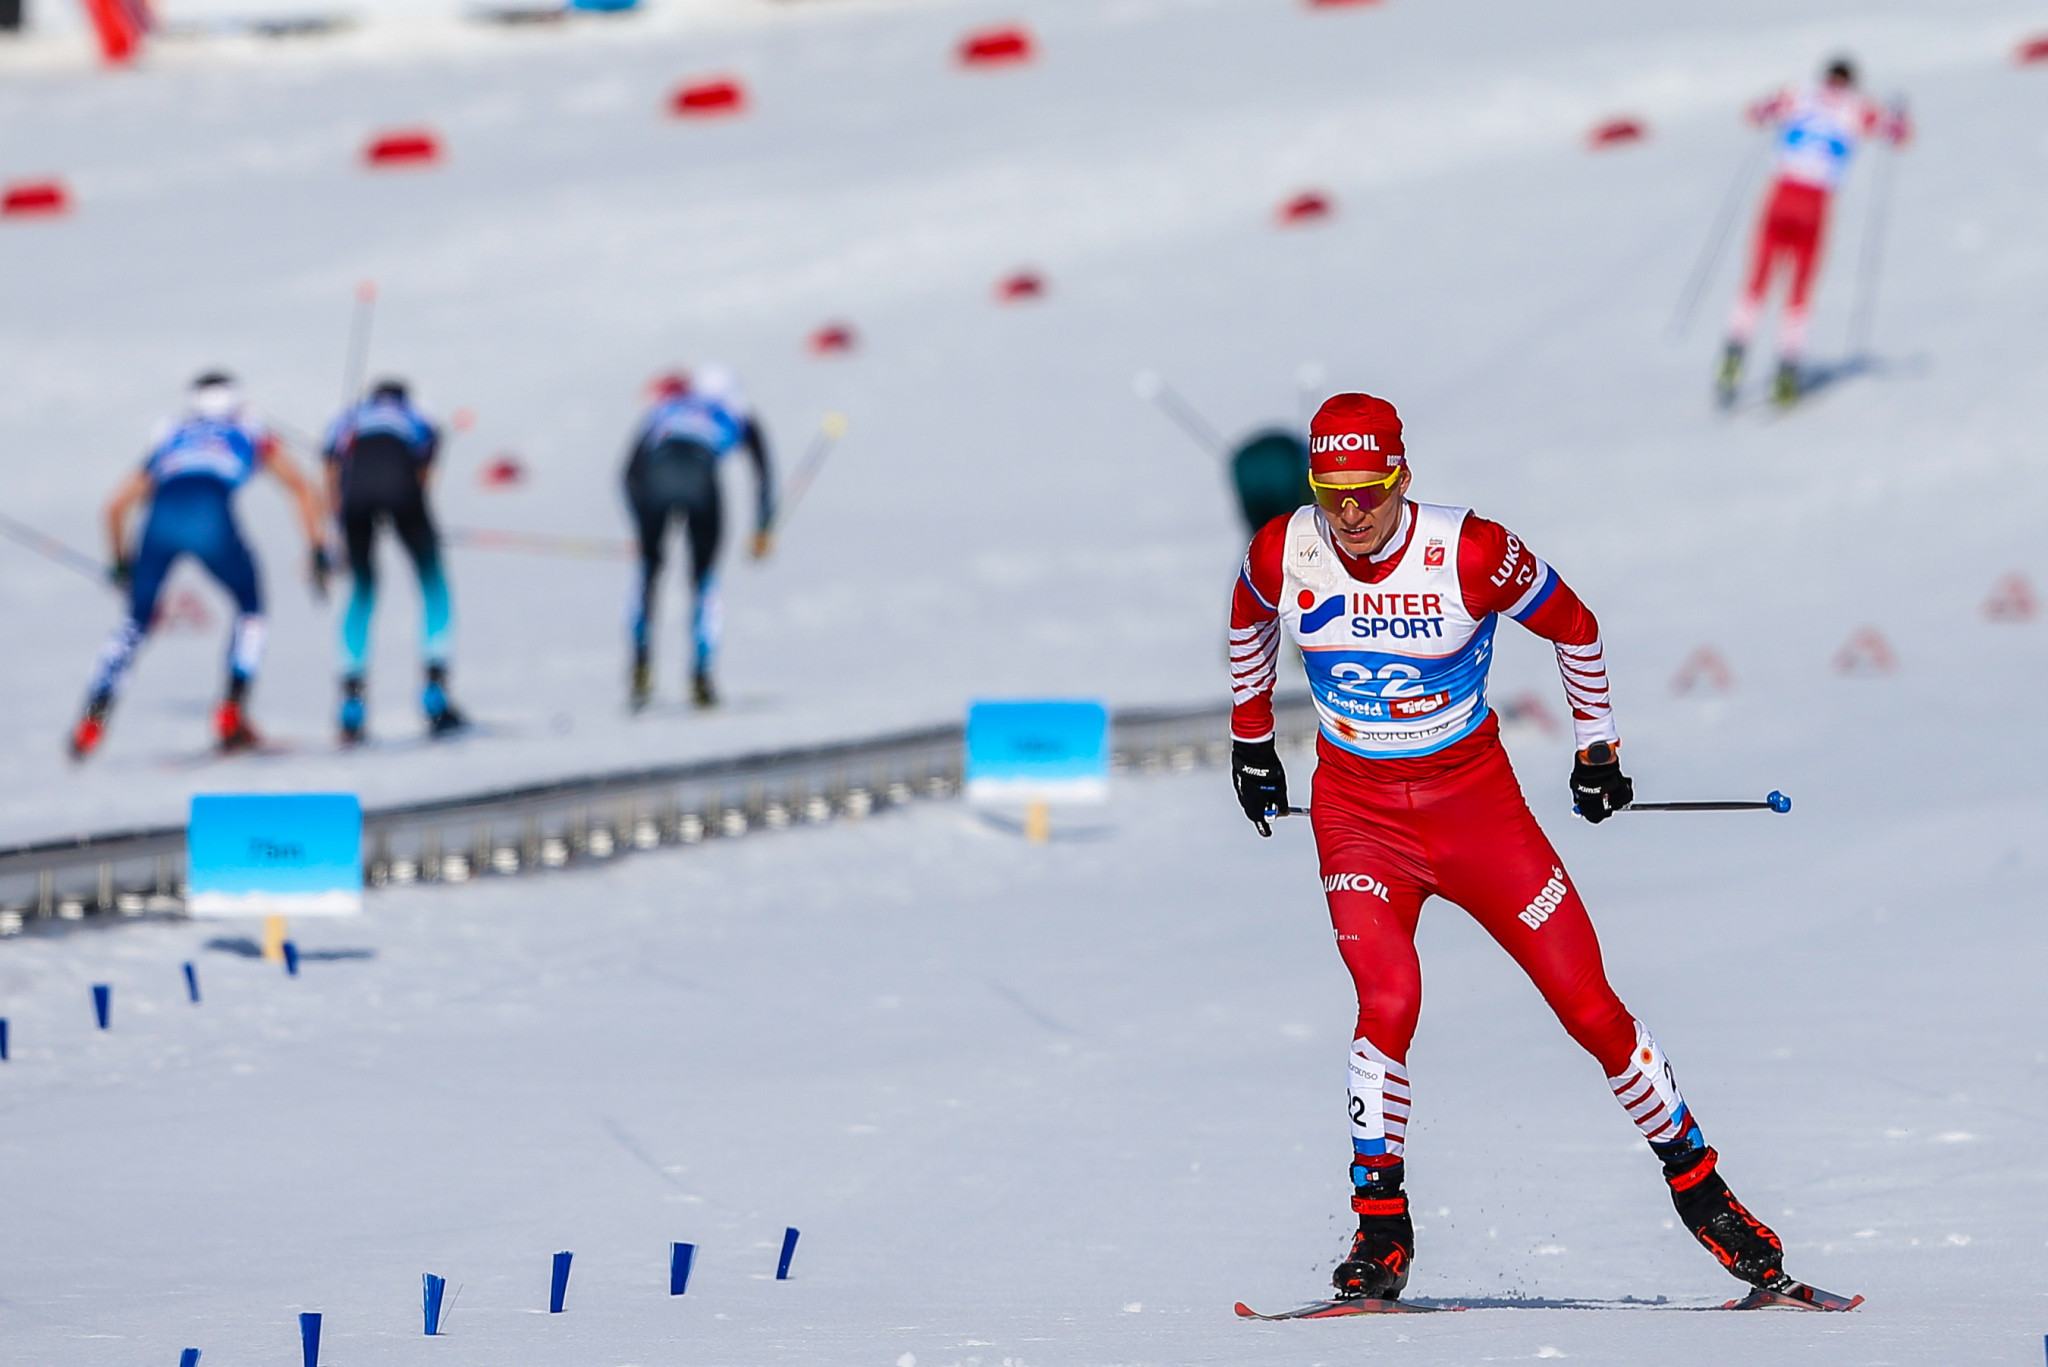 Alexander Bolshunov won today's 50km race at the Cross-Country World Cup ©Getty Images